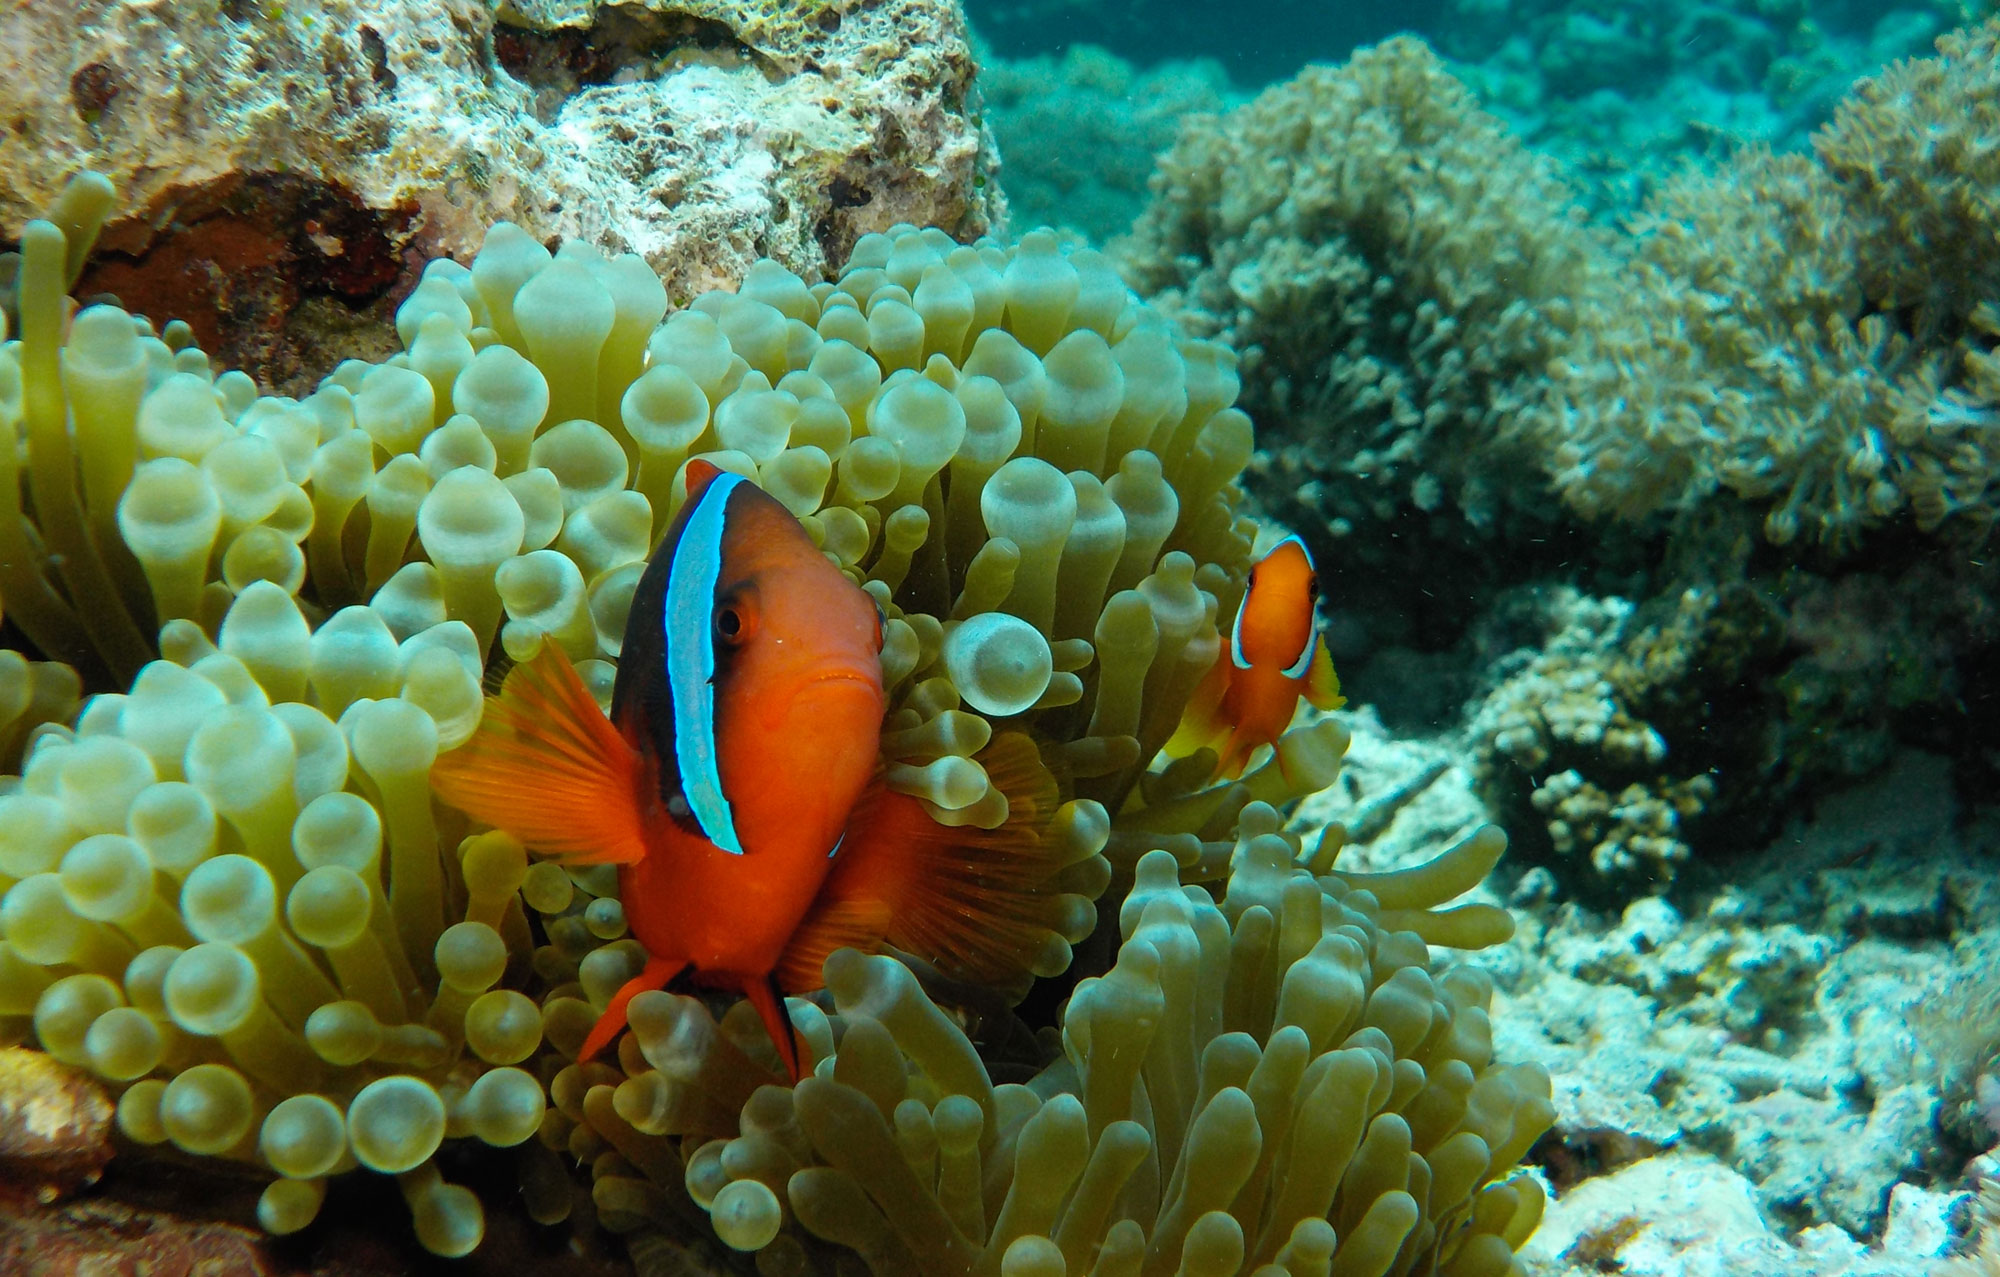 COOLPIX W150 photo of a clownfish on a reef underwater